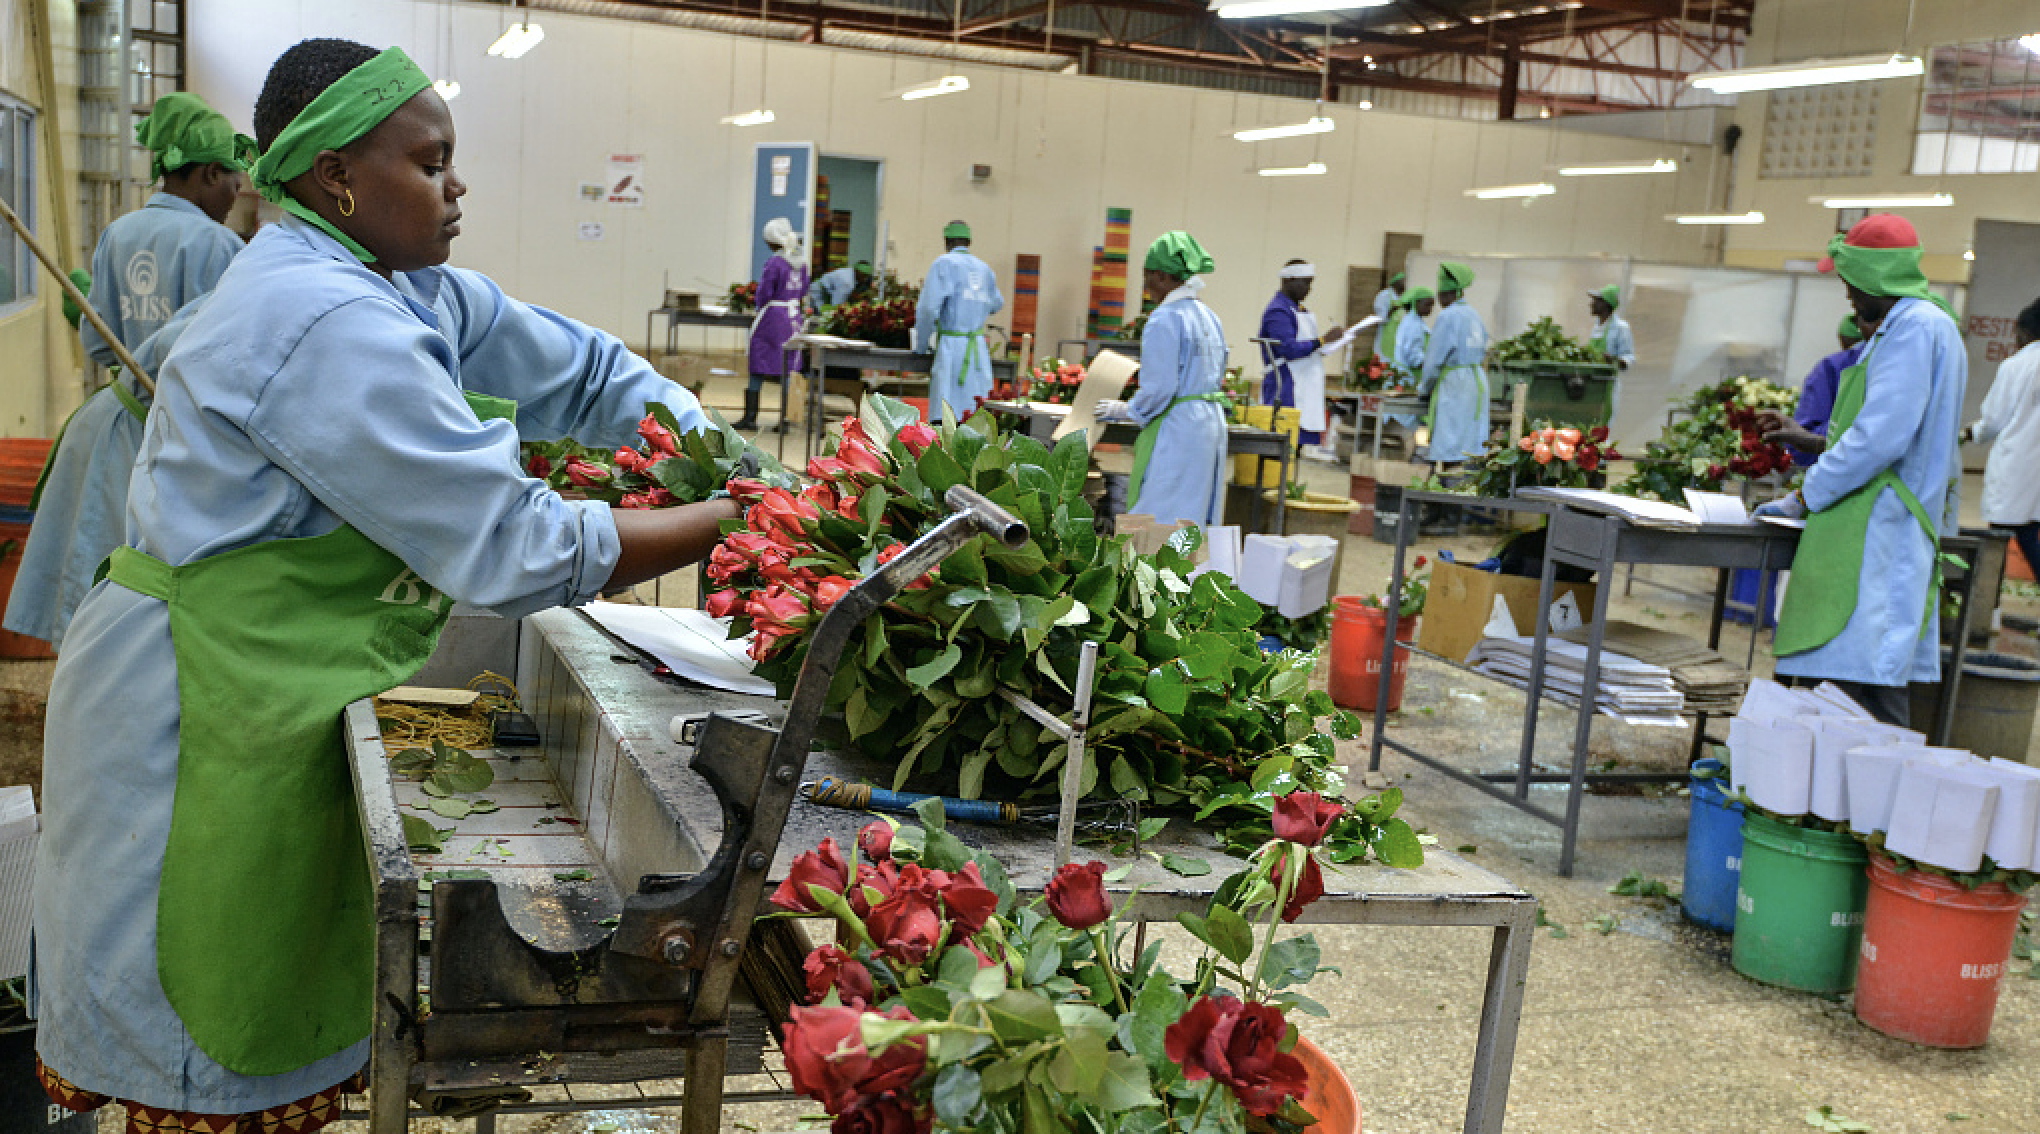 FILE: A worker measures and trims roses at a greenhouse in Njoro. Kenya is among the top producers of cut flowers in the world, exporting 70 percent of its harvest to Europe. /CFP